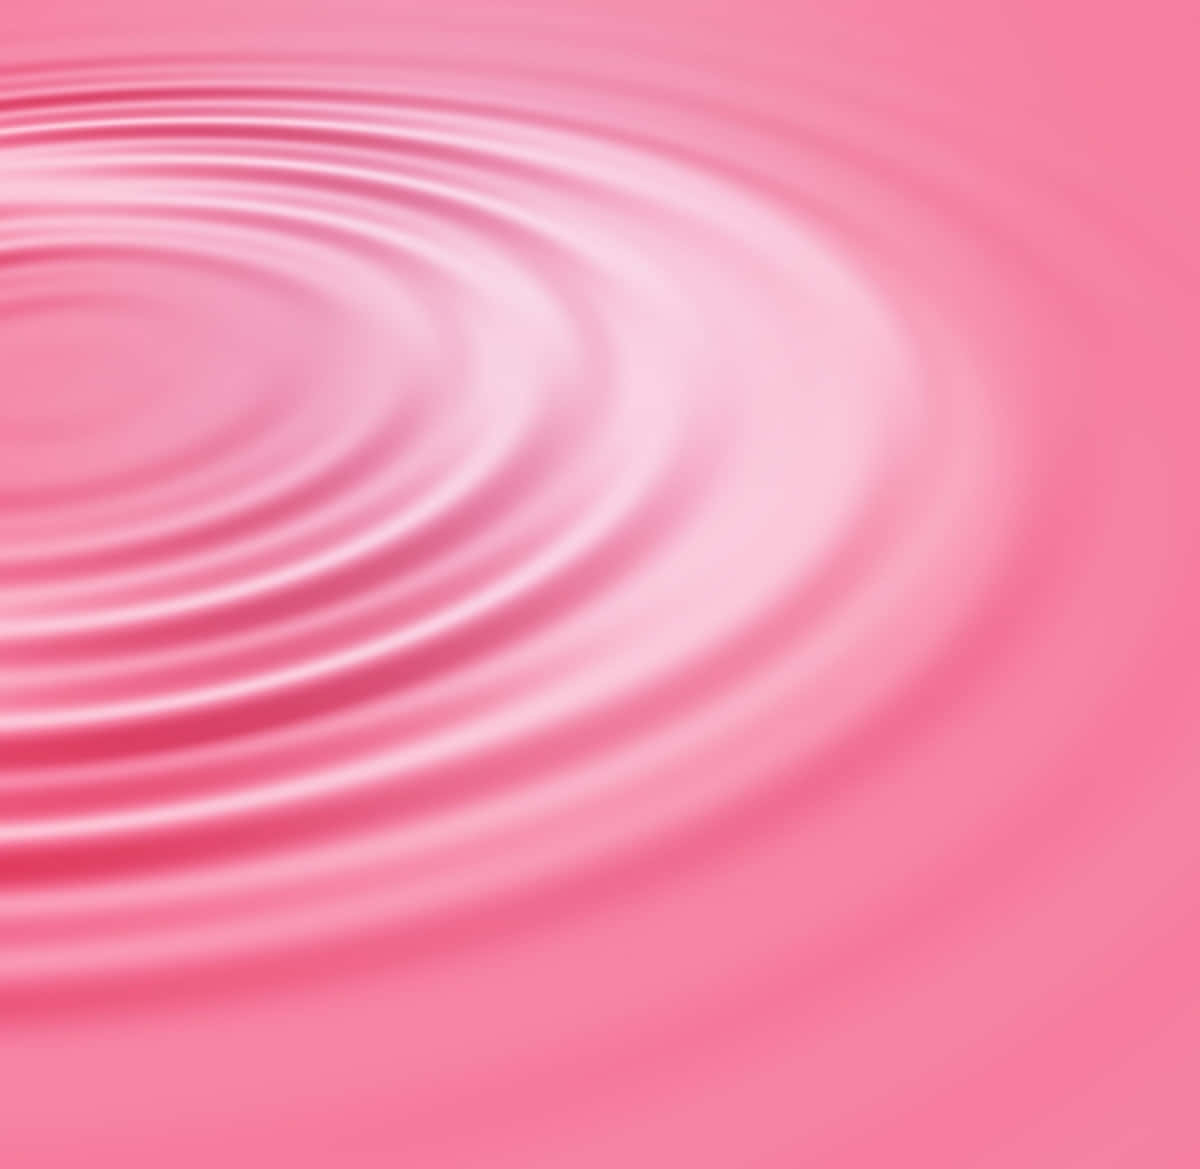 Brighten Up Your Day with This Colorful Pink Swirl